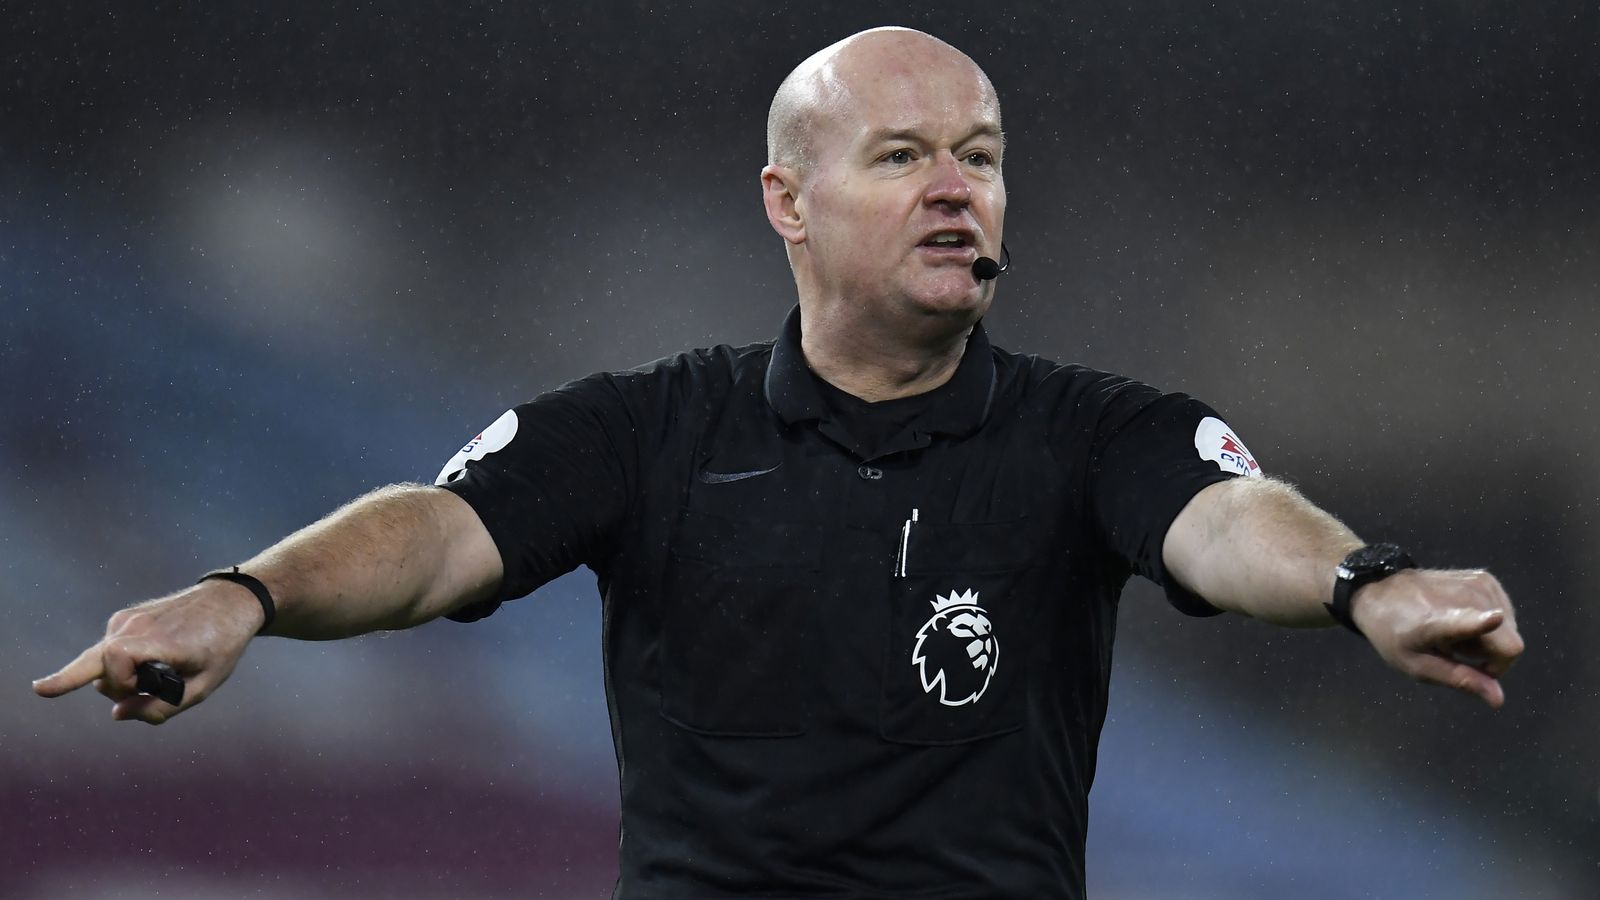 Lee Mason: Video Assistant Referee leaves PGMOL and will no longer work on Premier League games after error cost Arsenal vs Brentford | Football News